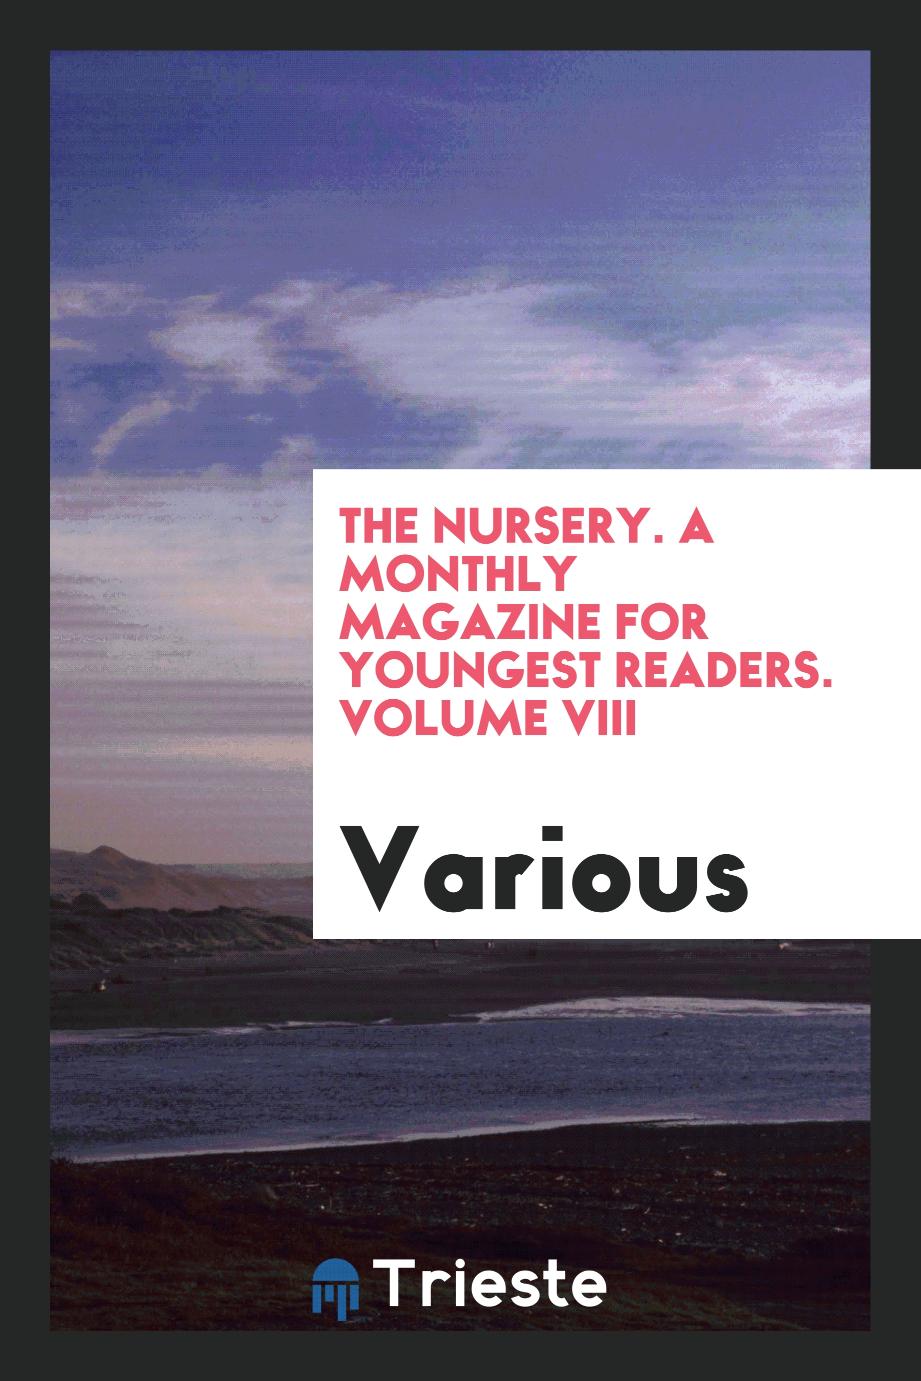 The Nursery. A Monthly Magazine for Youngest Readers. Volume VIII